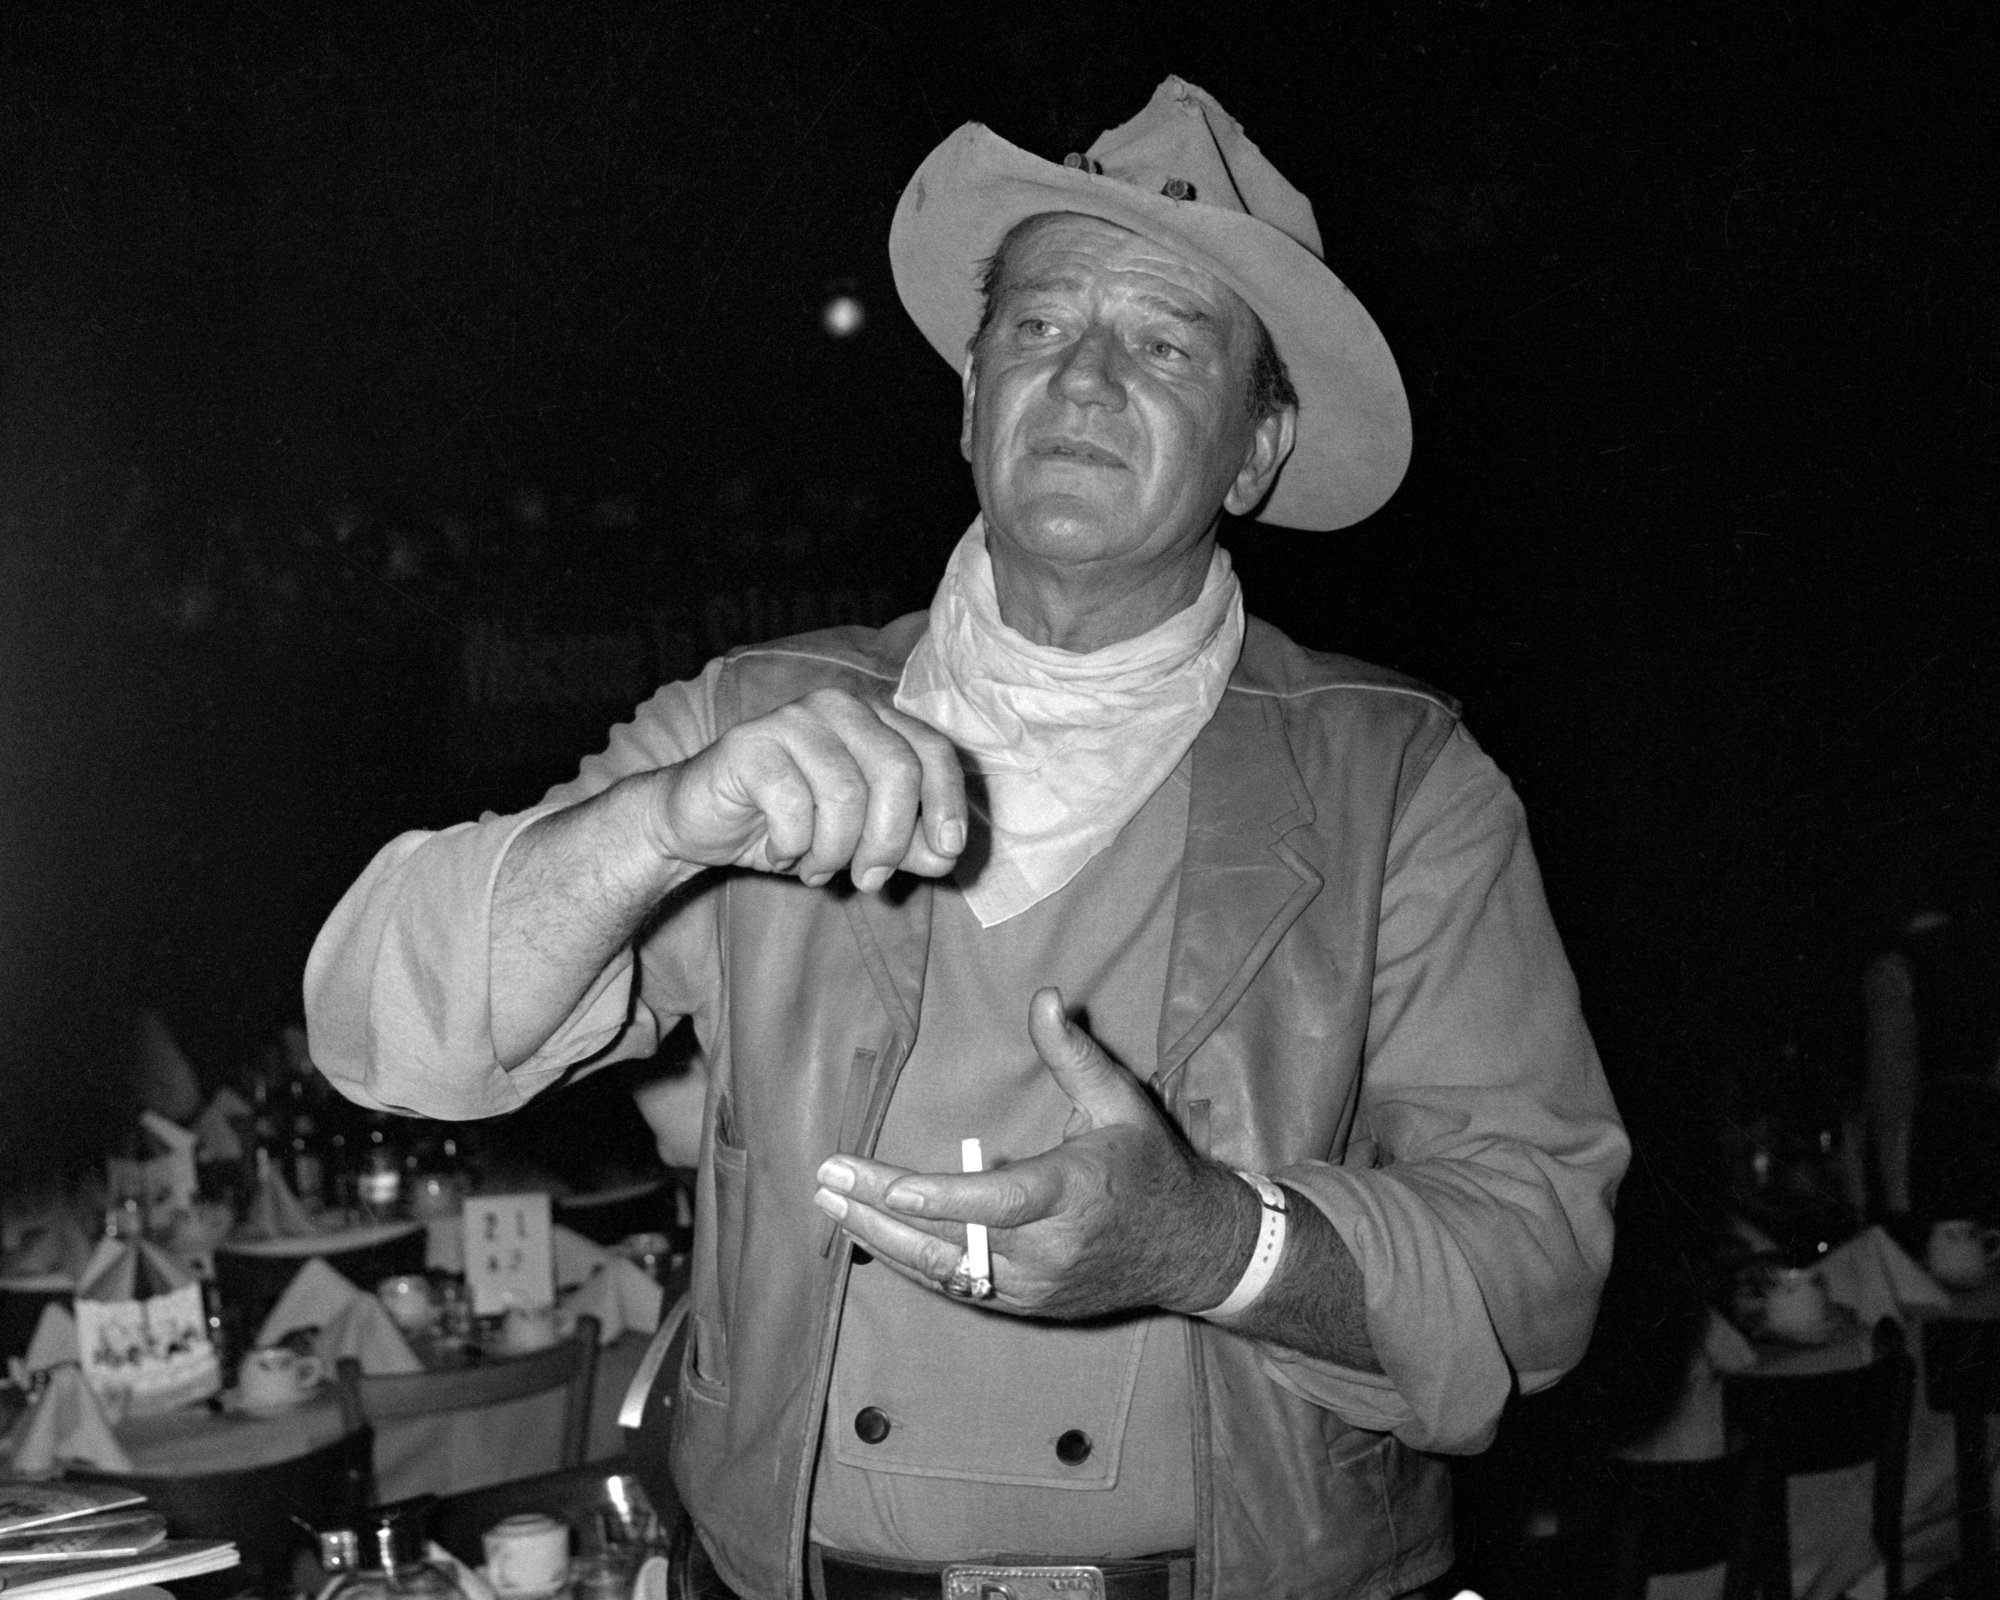 John Wayne, who submitted the John Wayne Casserole recipe, wearing a cowboy hat and holding a cigarette at an unknown dinner event